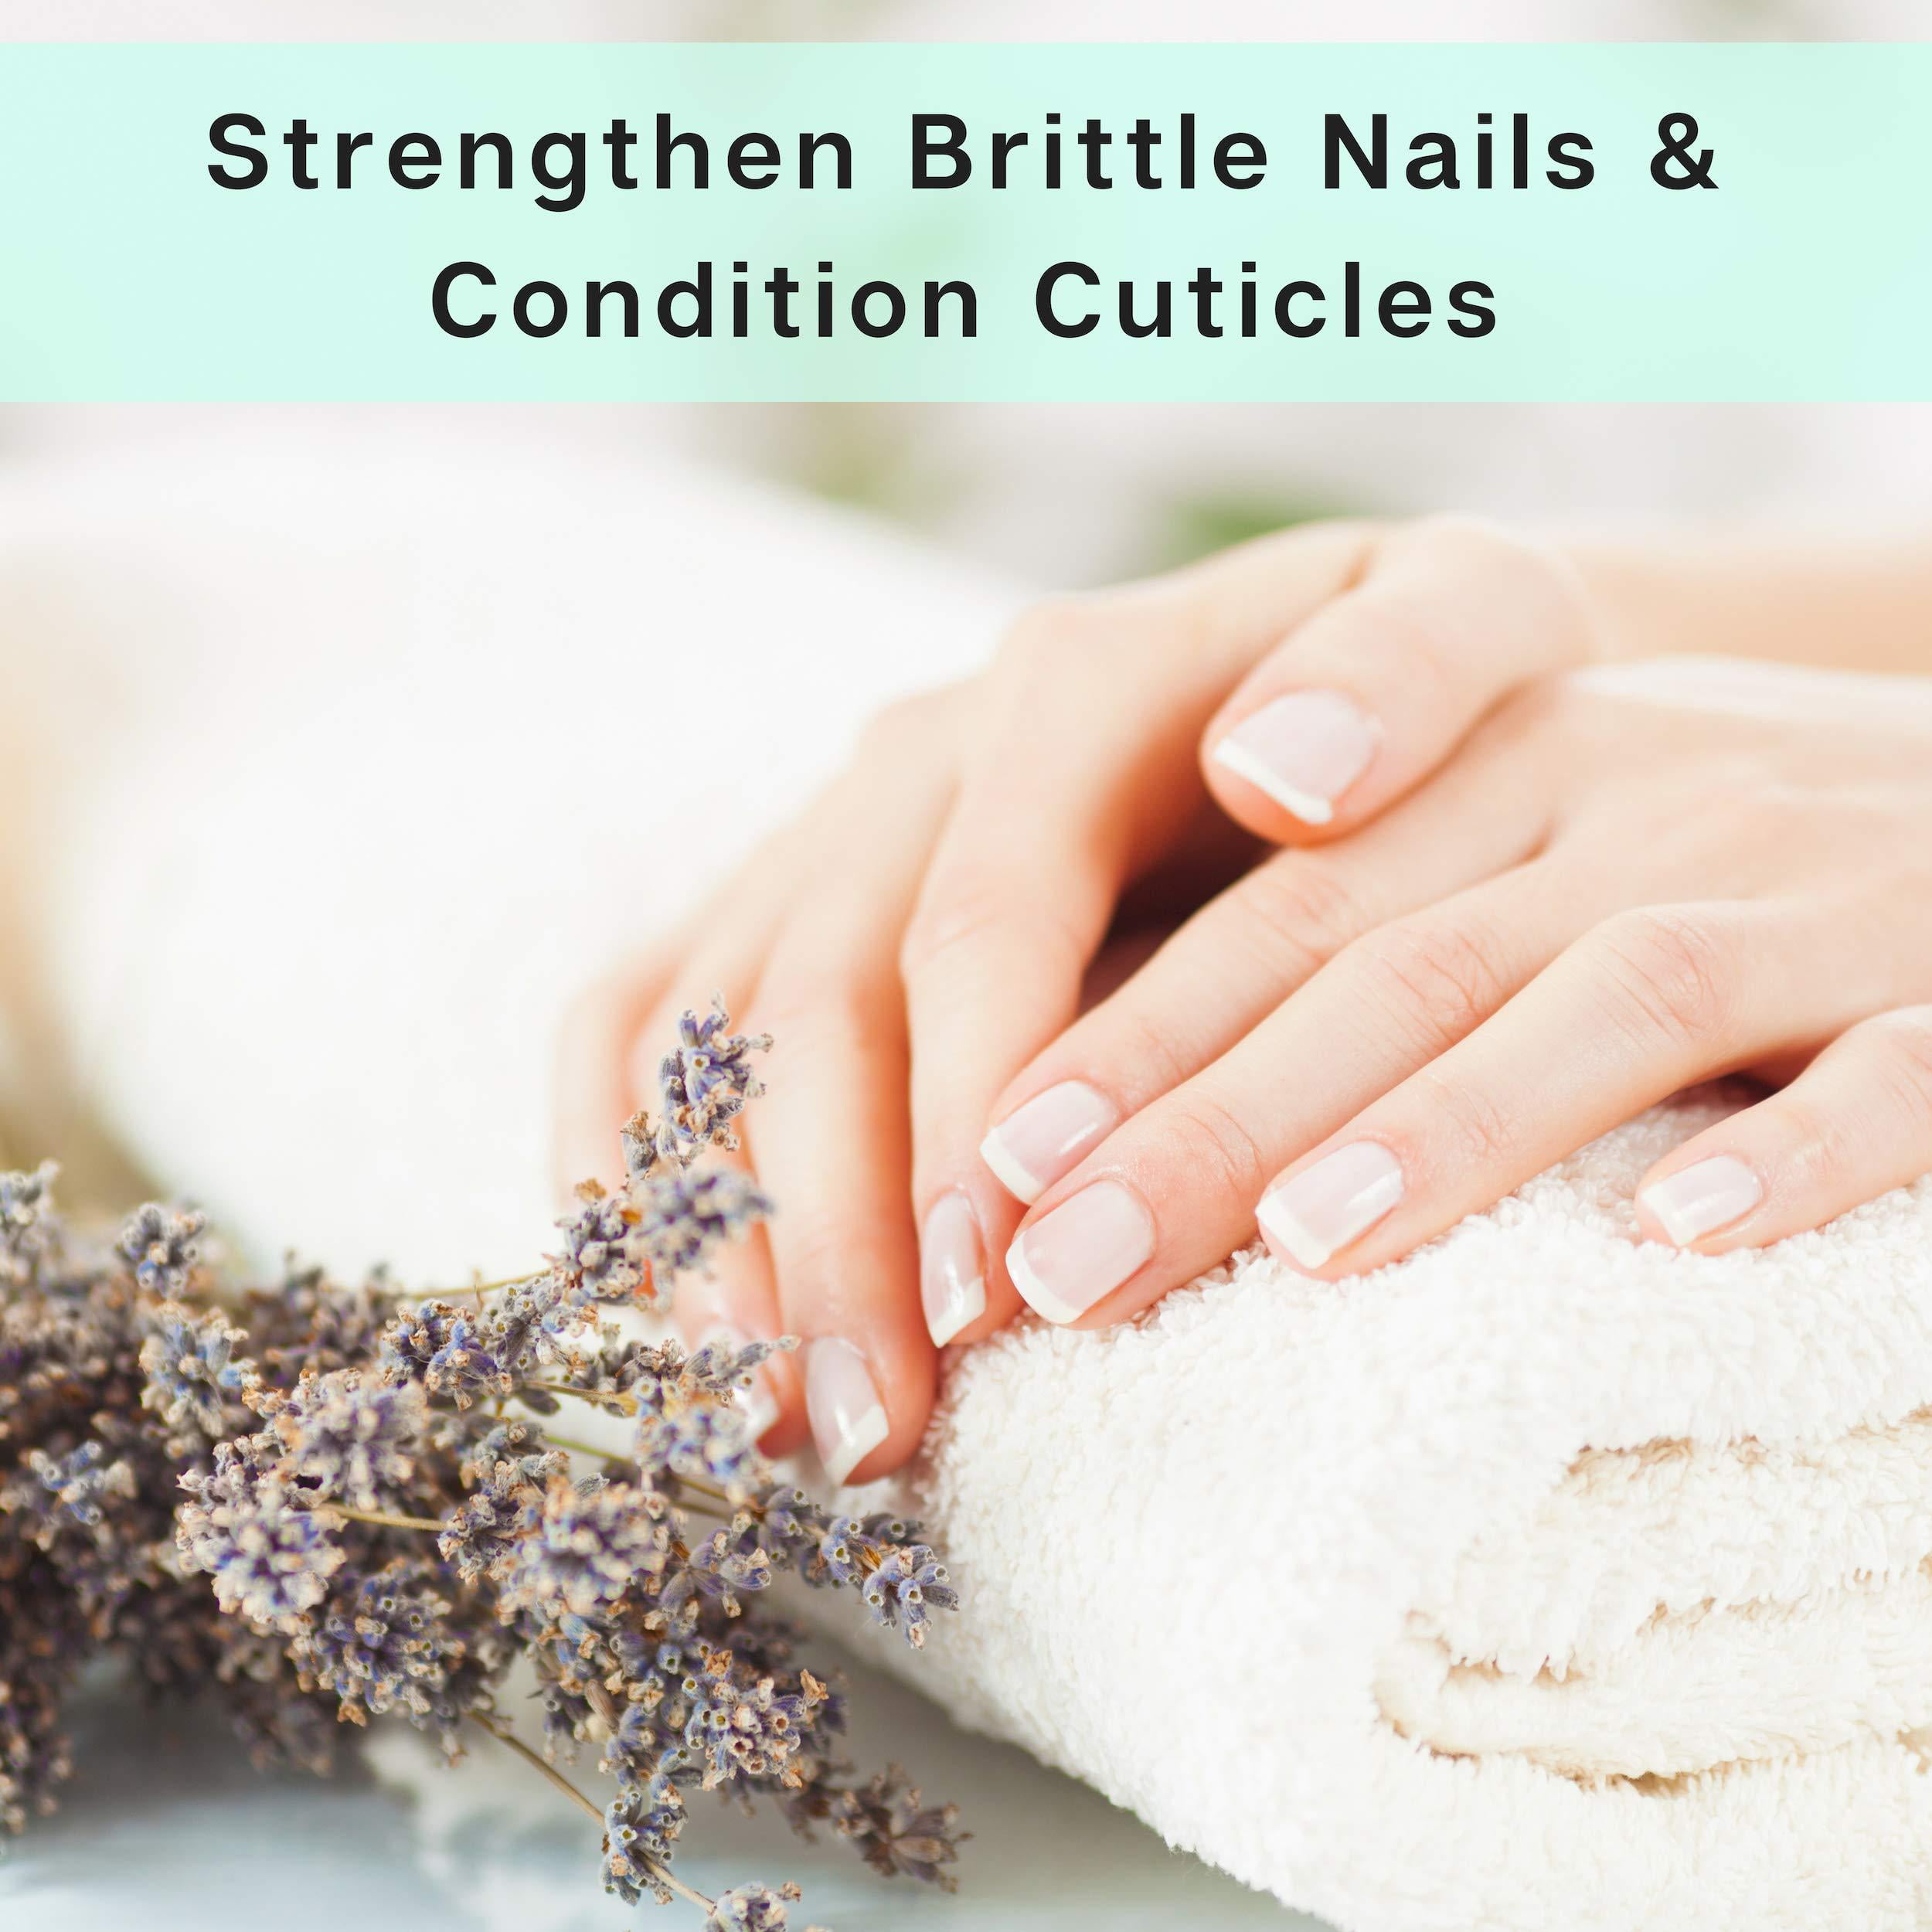 Natural Oils To Strengthen Brittle Nails | Onlymyhealth